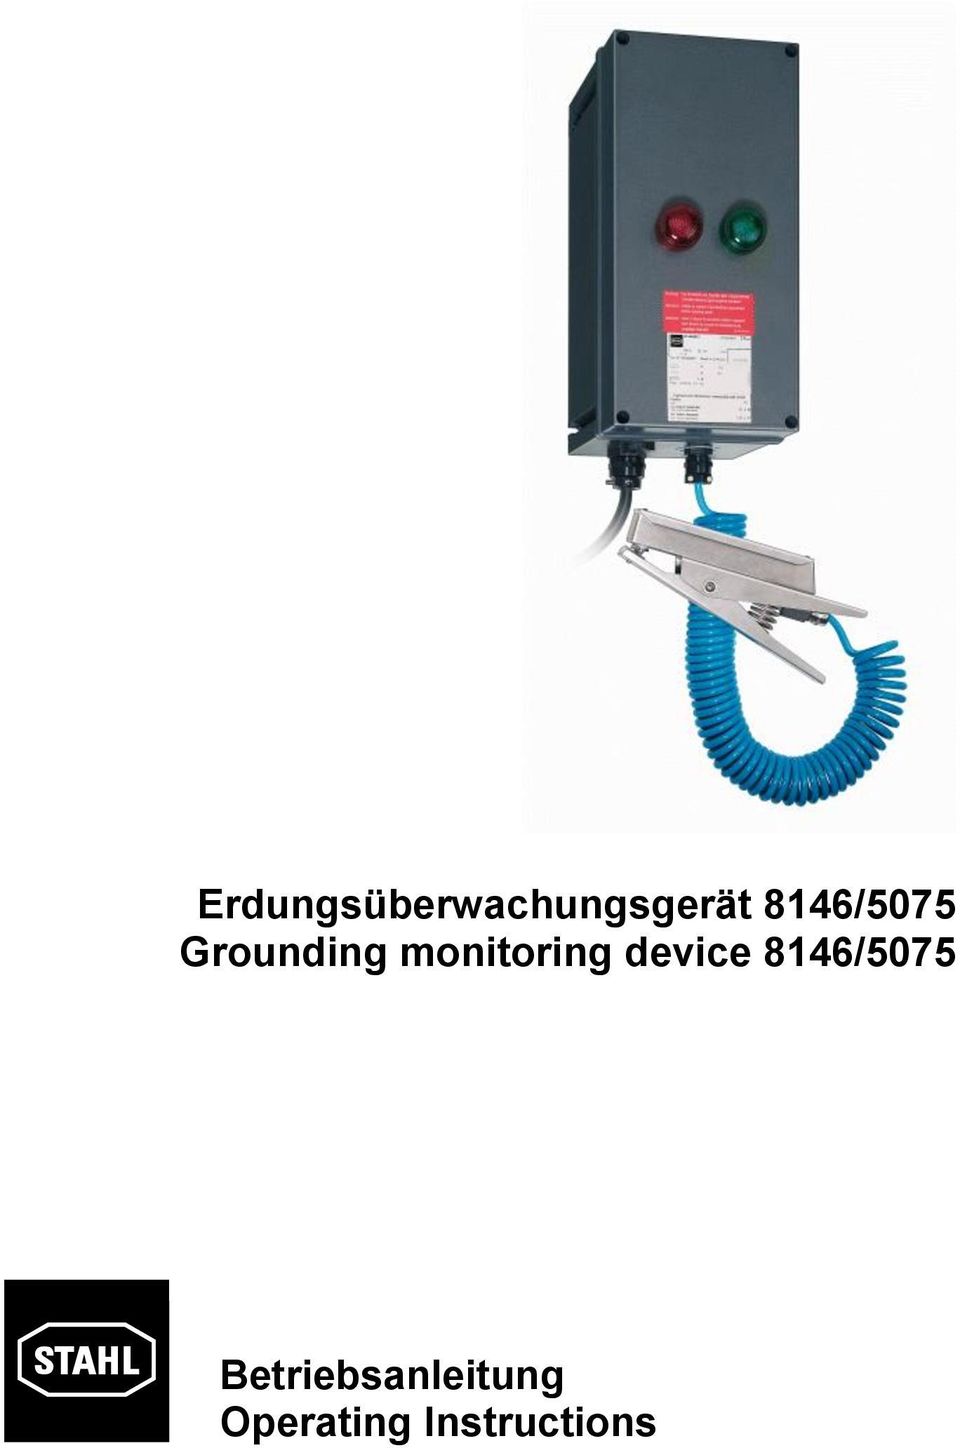 monitoring device 8146/5075